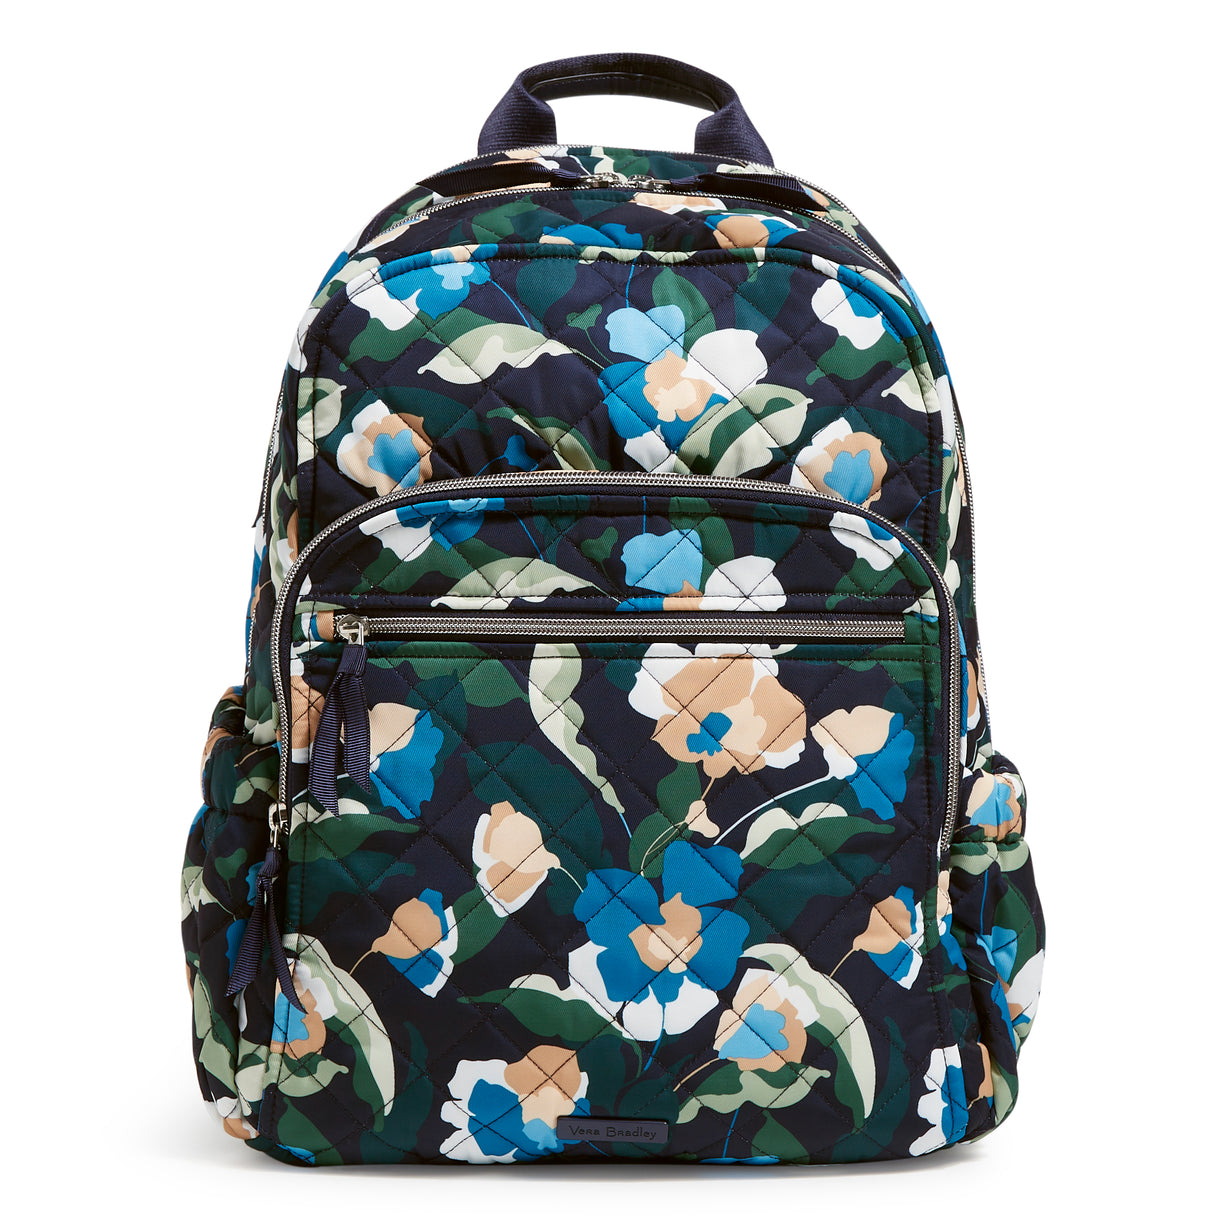 A Campus Backpack in Immersed Blooms pattern, from Vera Bradley.